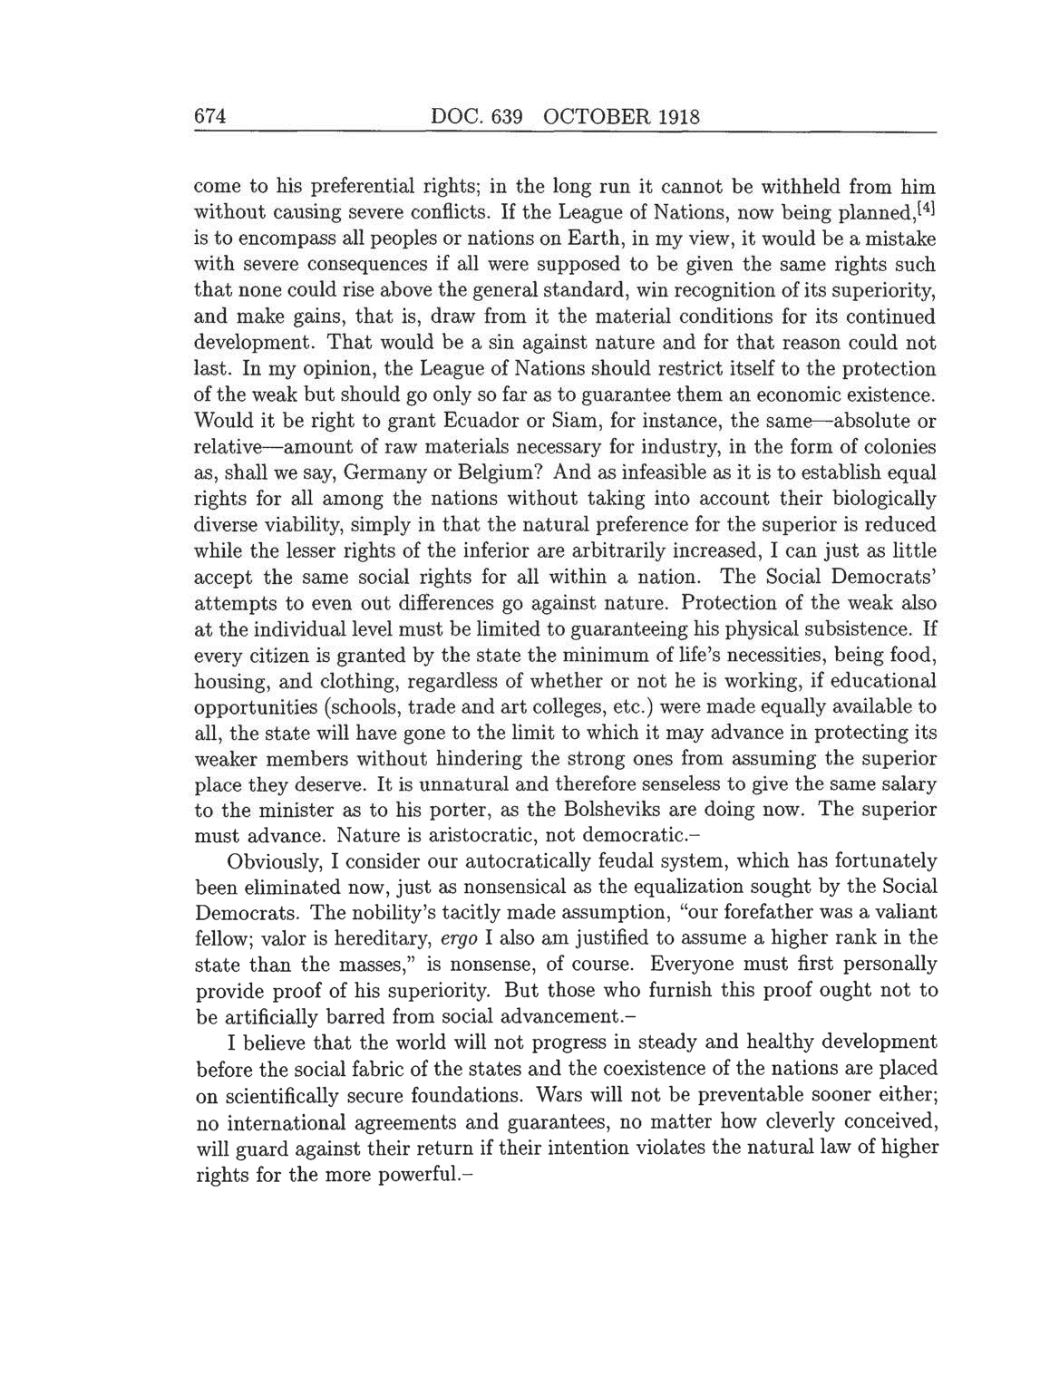 Volume 8: The Berlin Years: Correspondence, 1914-1918 (English translation supplement) page 674